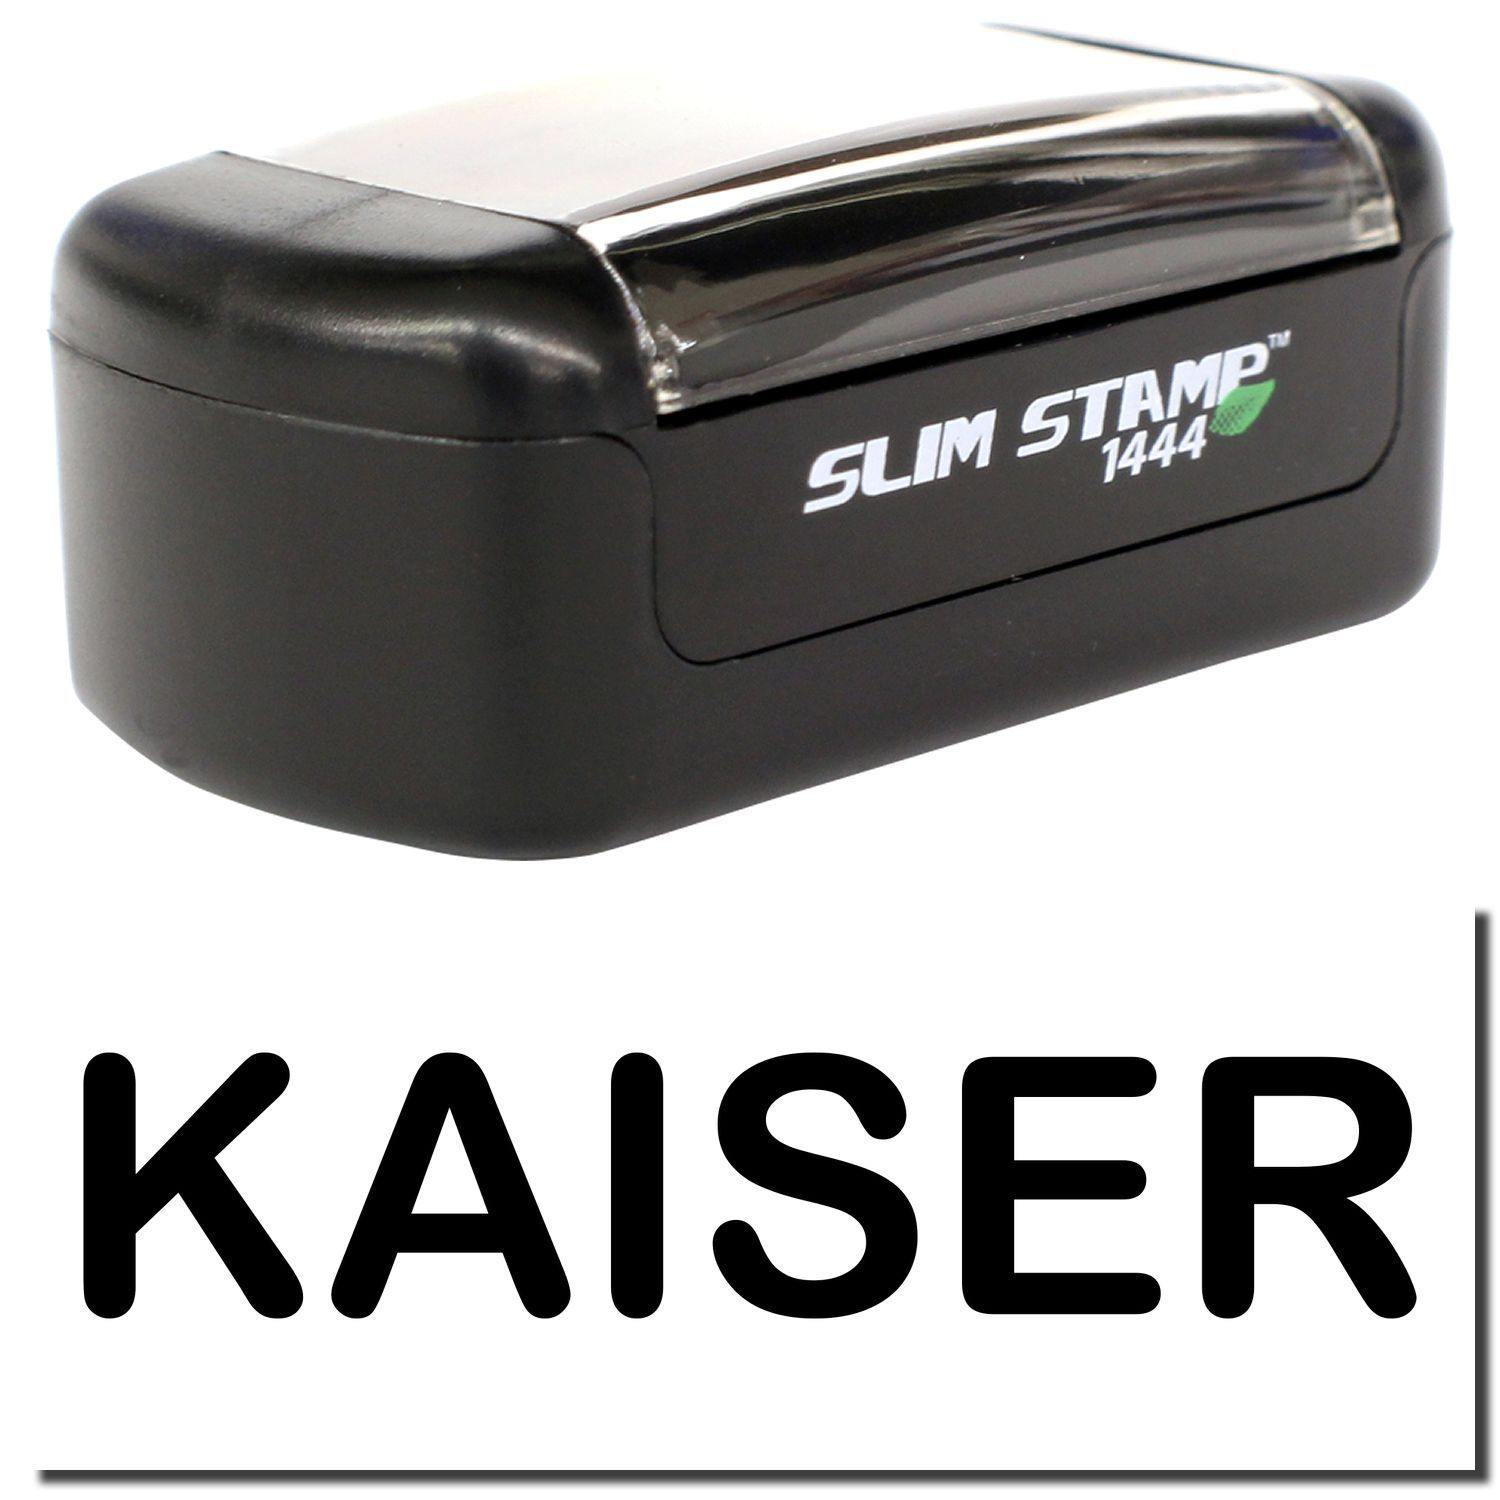 A stock office pre-inked stamp with a stamped image showing how the text "KAISER" is displayed after stamping.